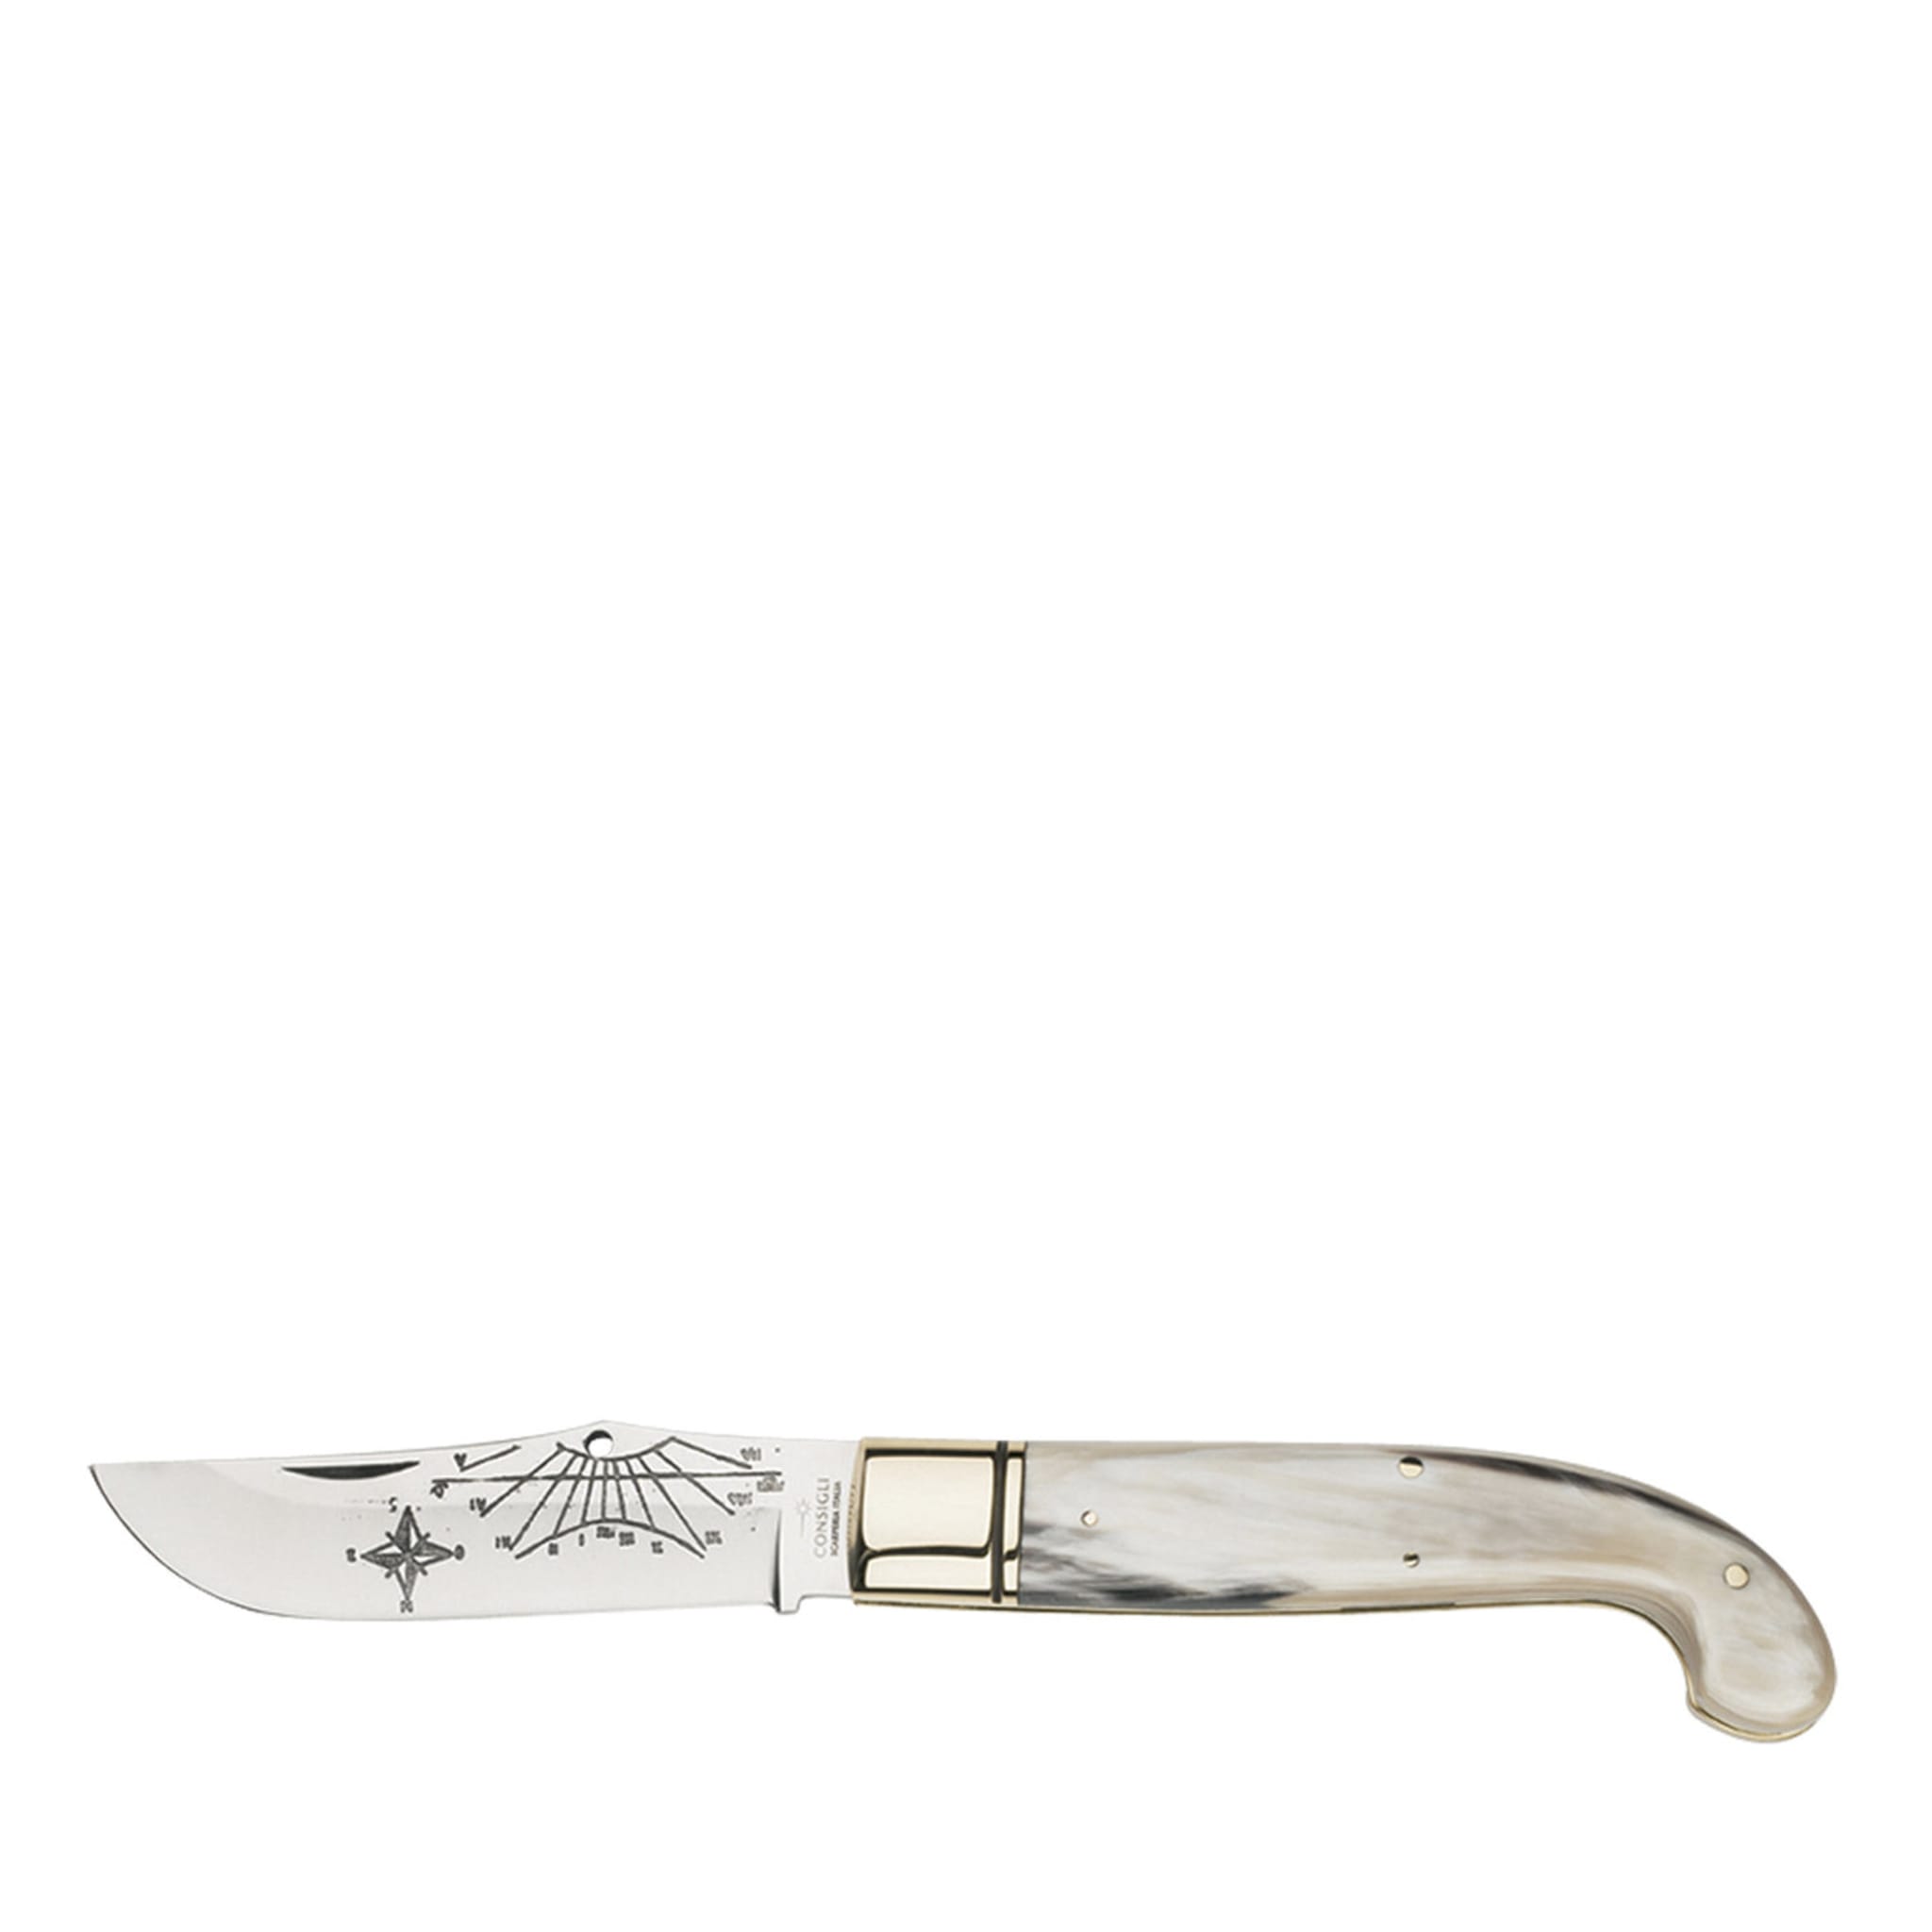 Zuava Pocket Knife with Oxhorn Handle - Main view